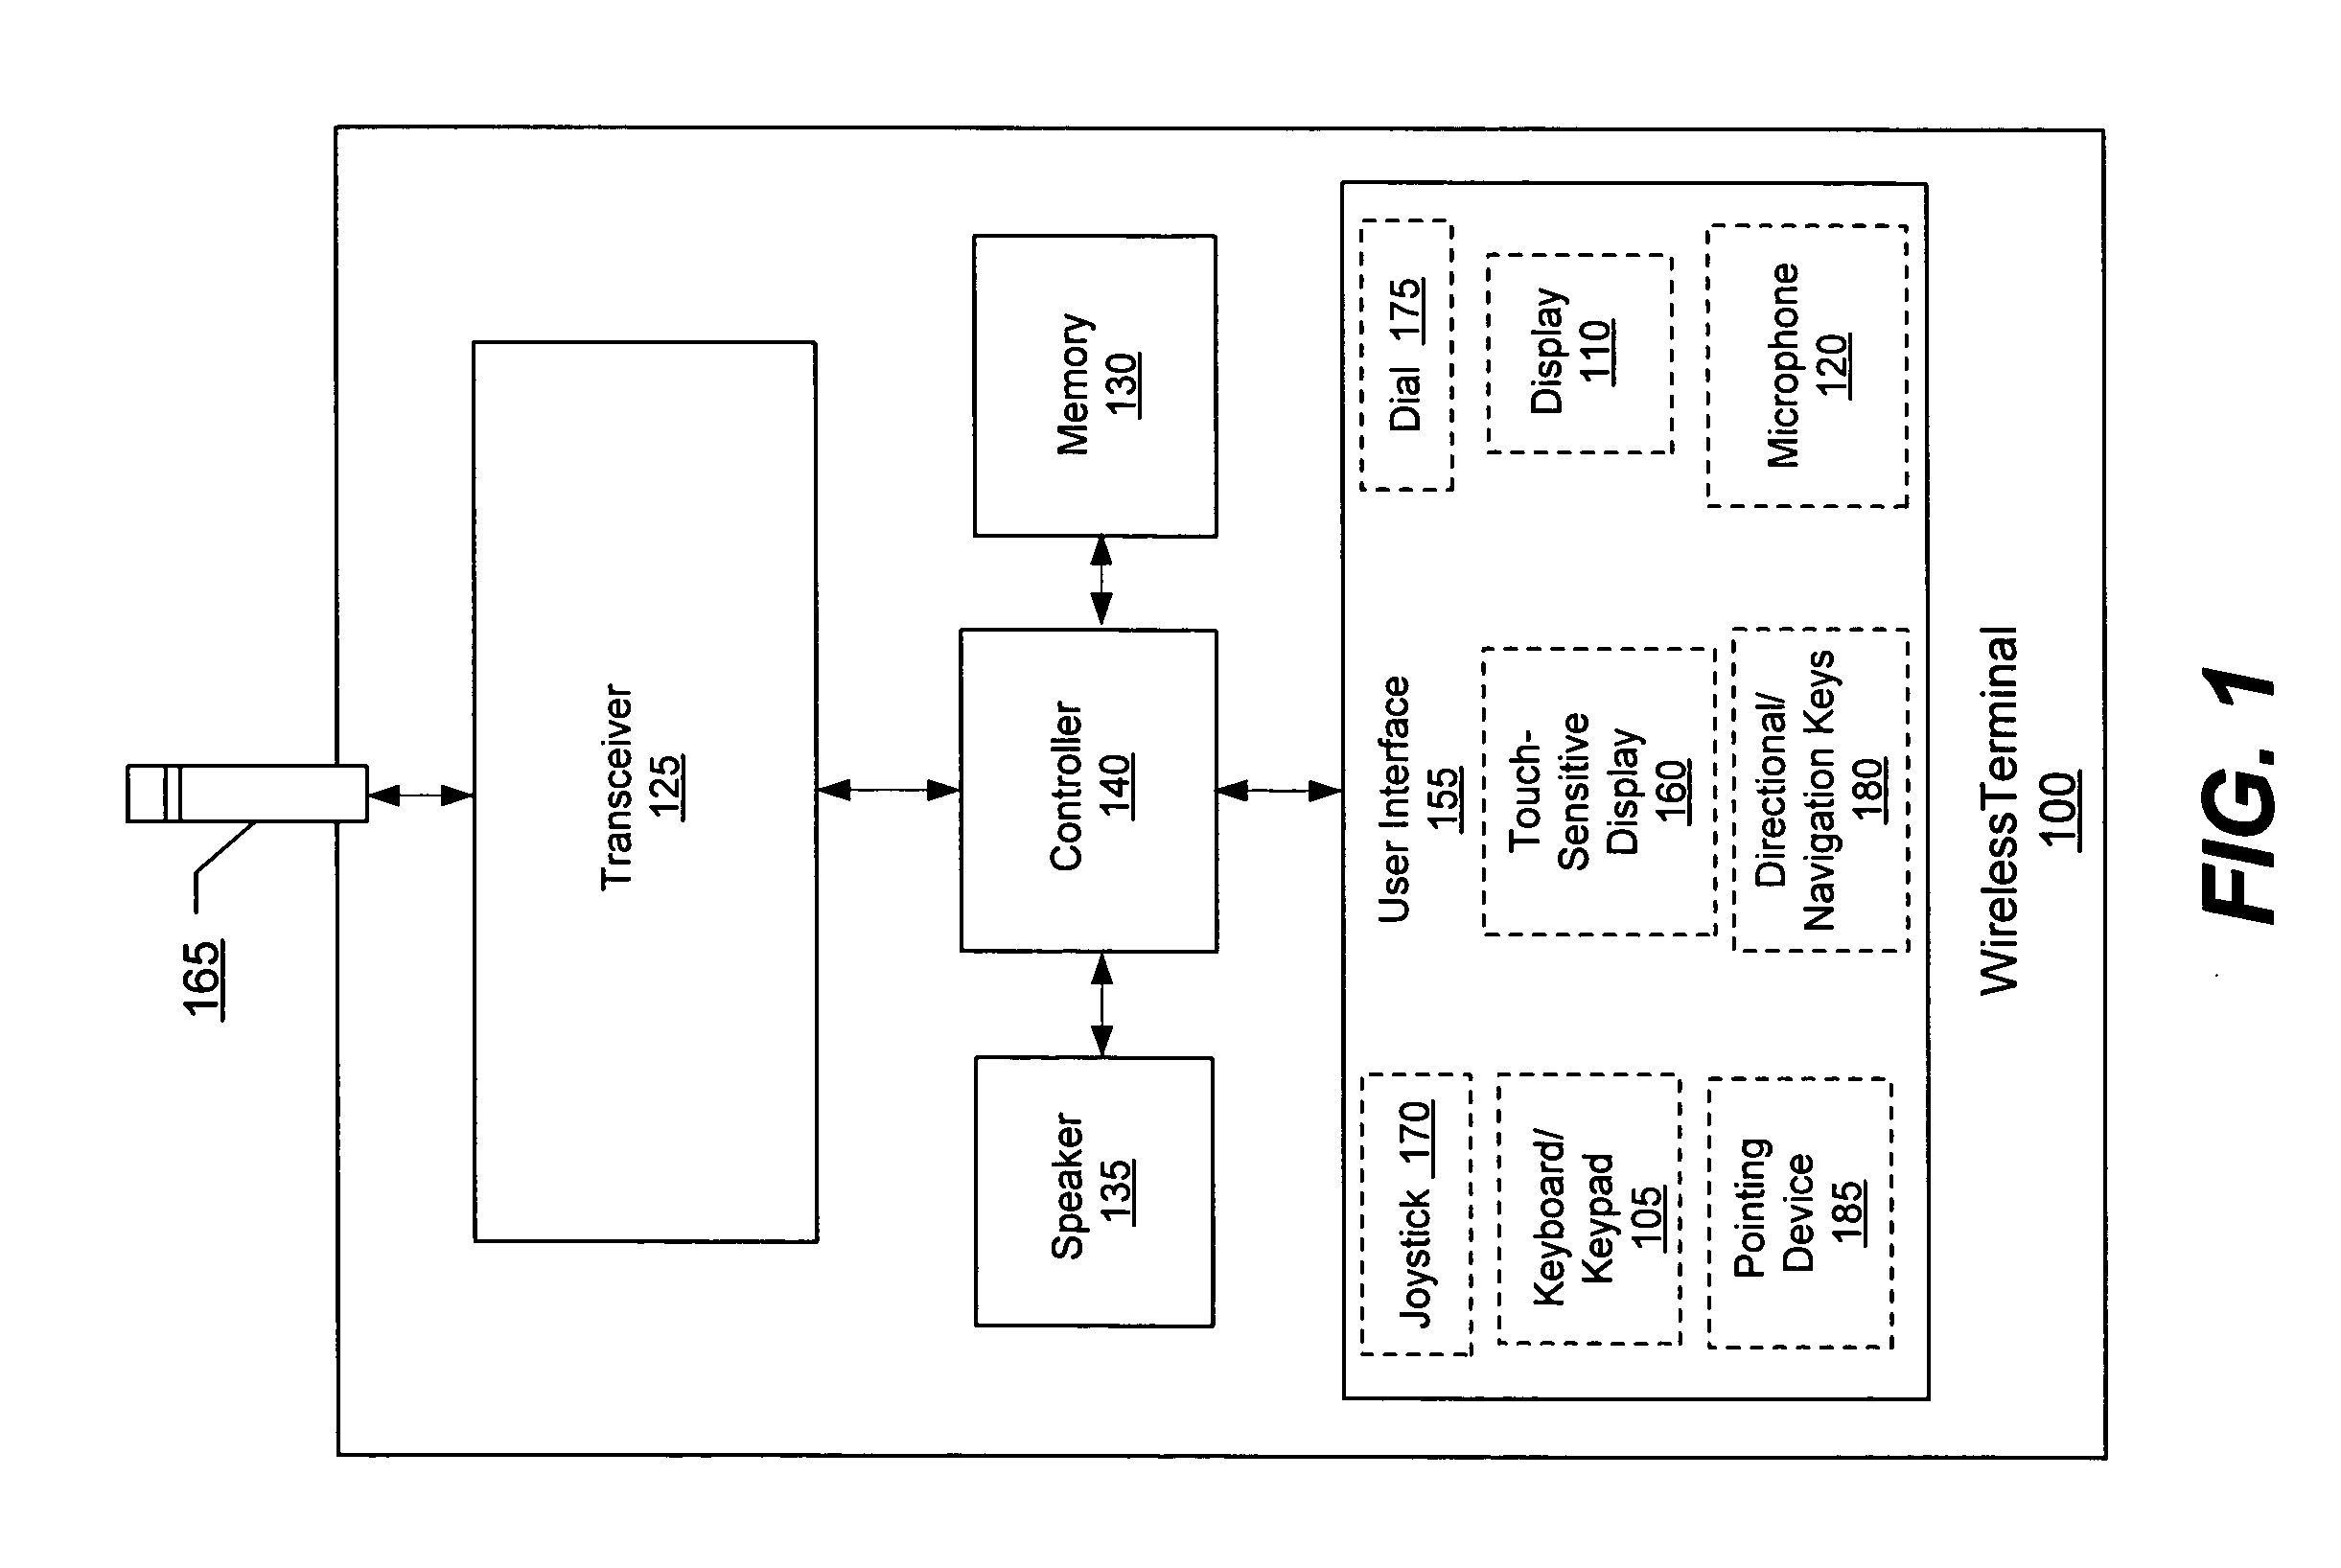 Devices, methods, and computer program products for controlling power transfer to an antenna in a wireless mobile terminal